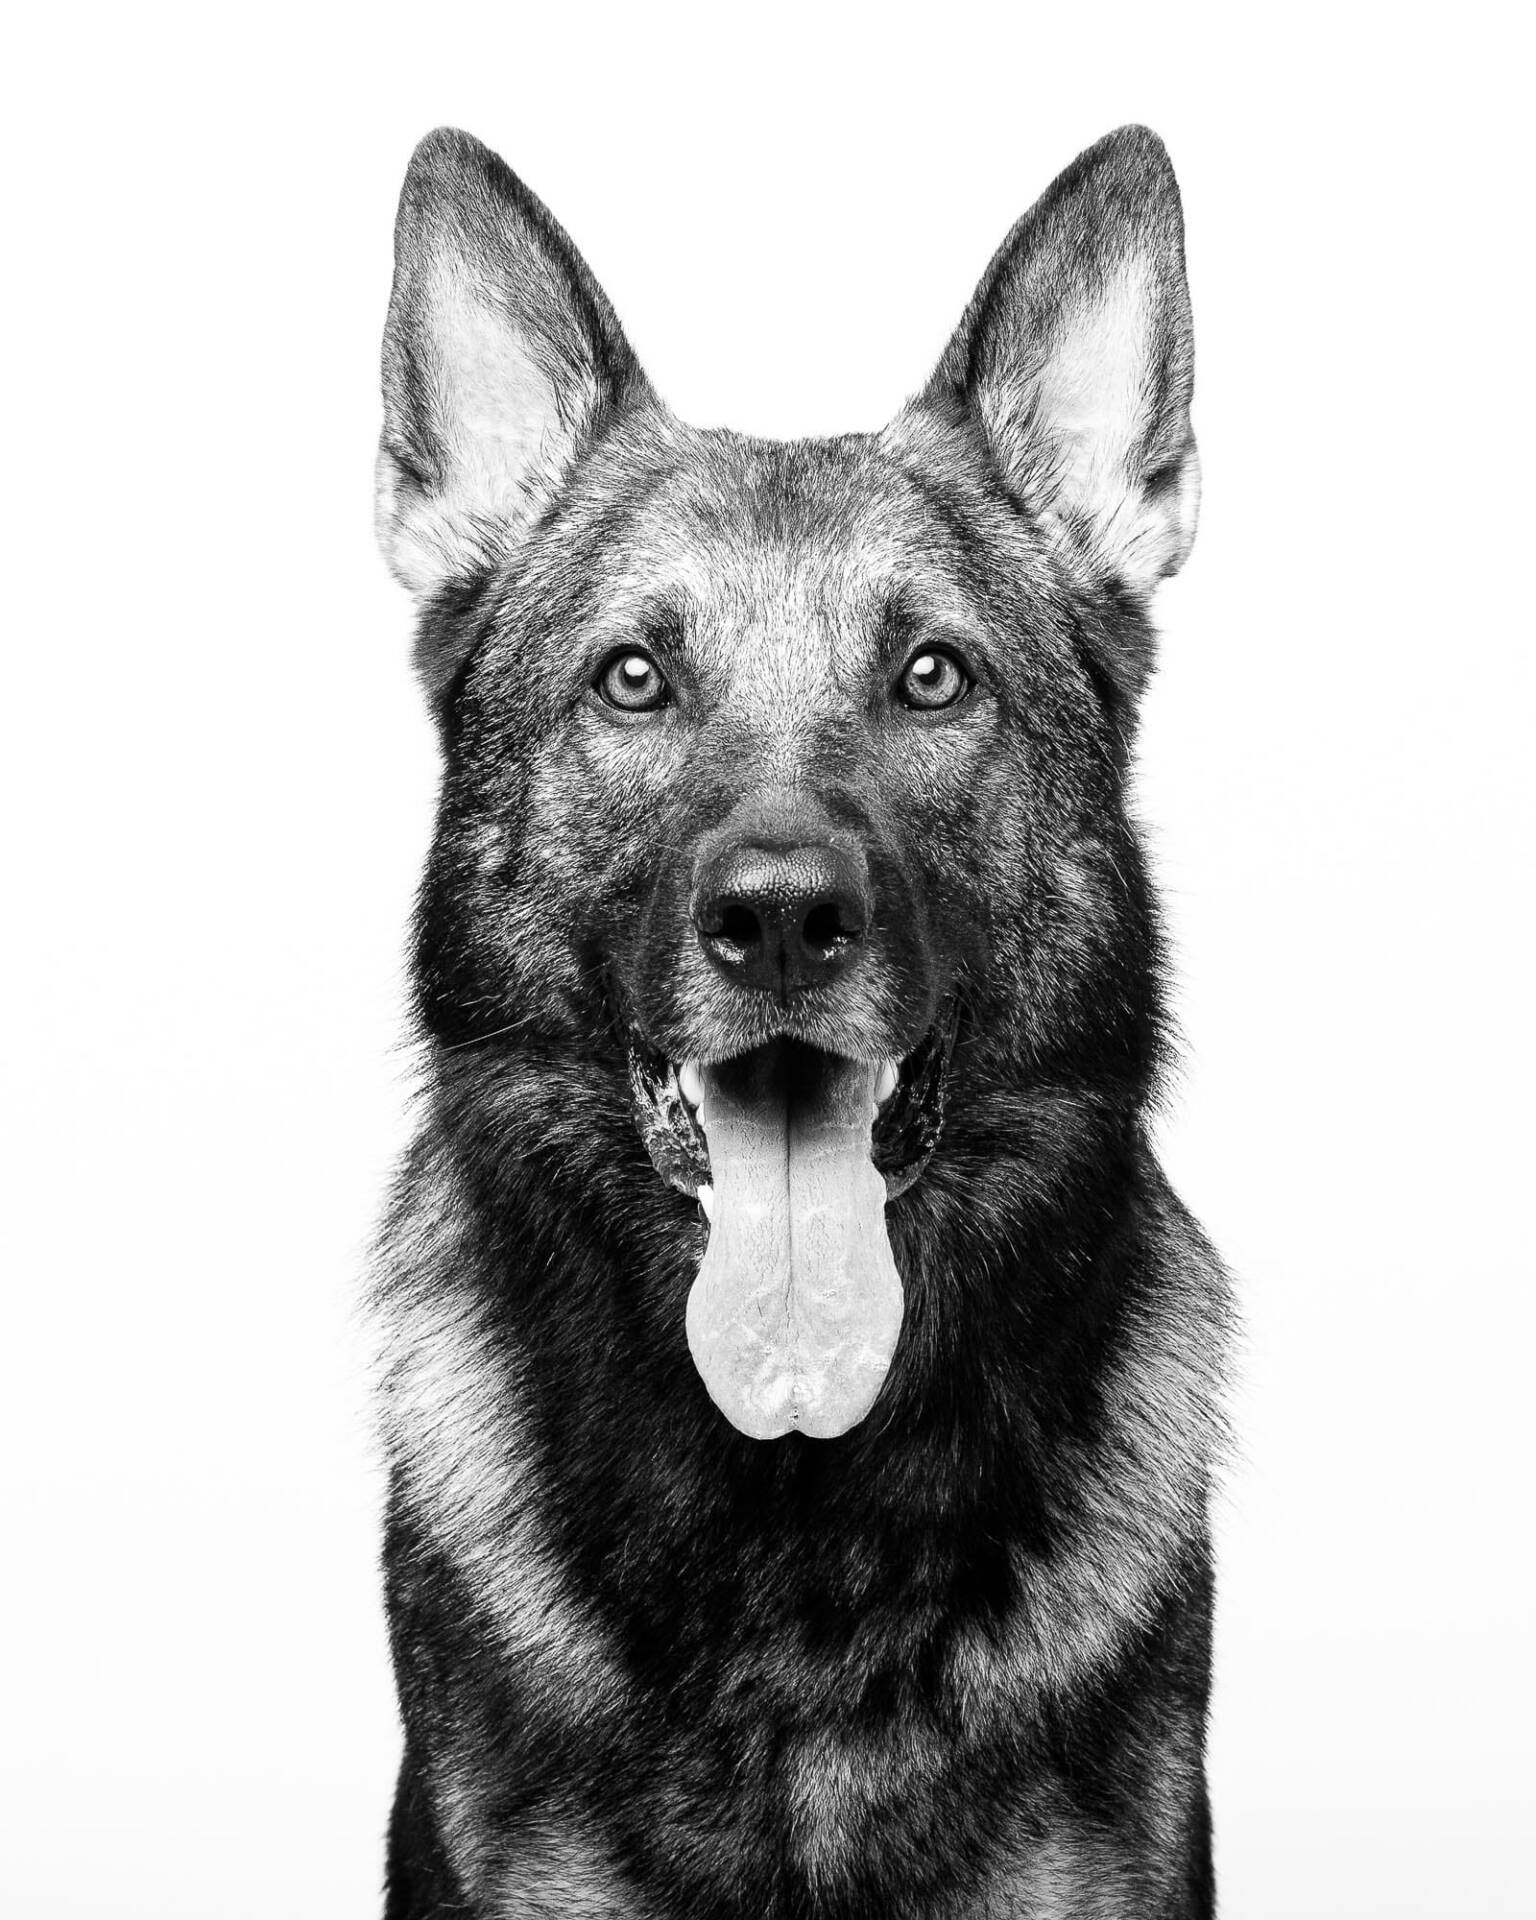 German Shepherd Dog Studio Portrait by Mark Hewitson of Mark Hewitson Photography, Thame, Oxfordshire